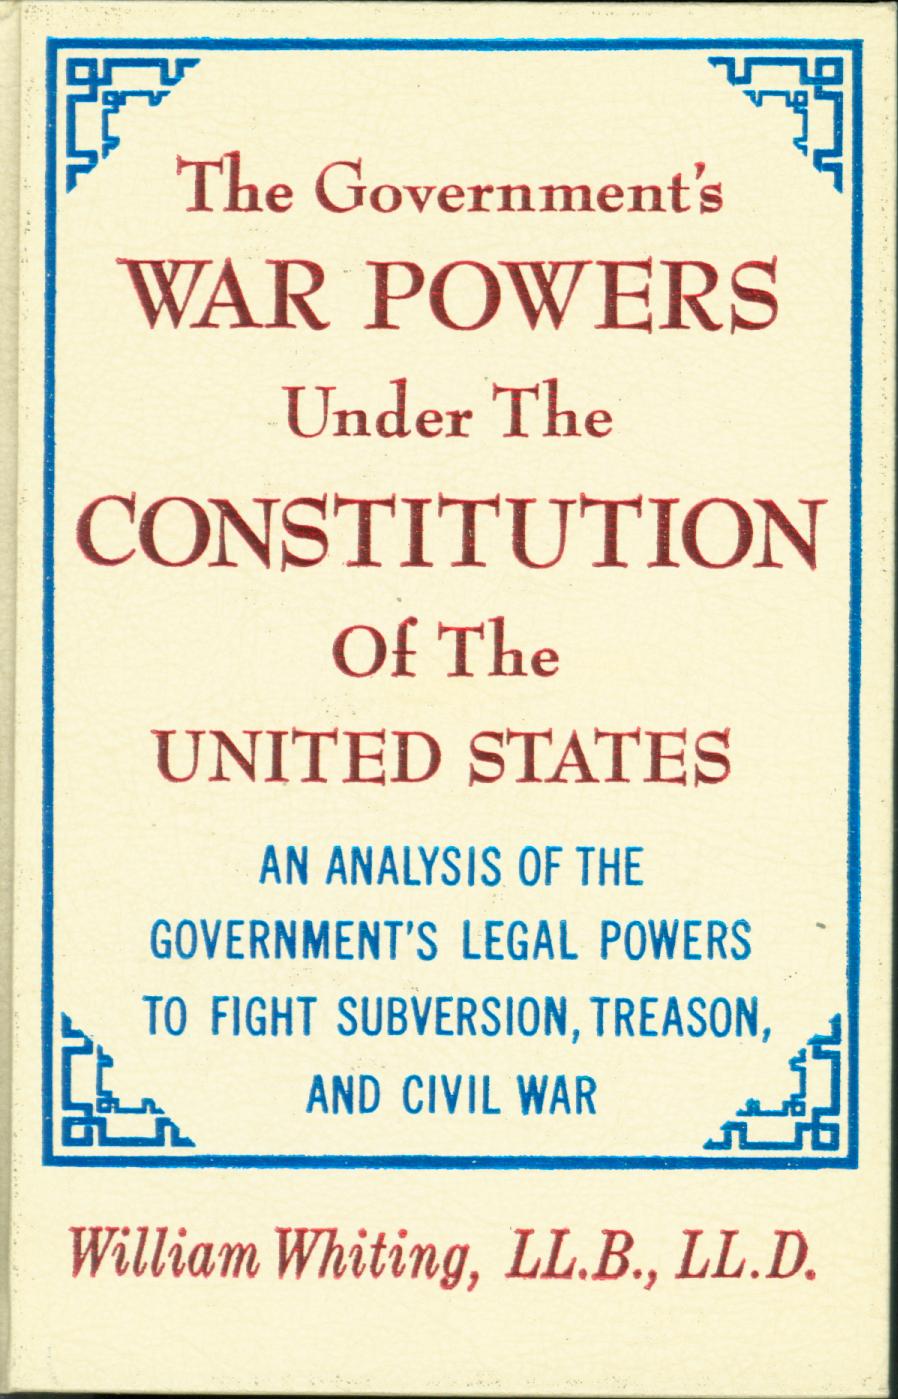 THE GOVERNMENT'S WAR POWERS under the Constitution of the United States. 